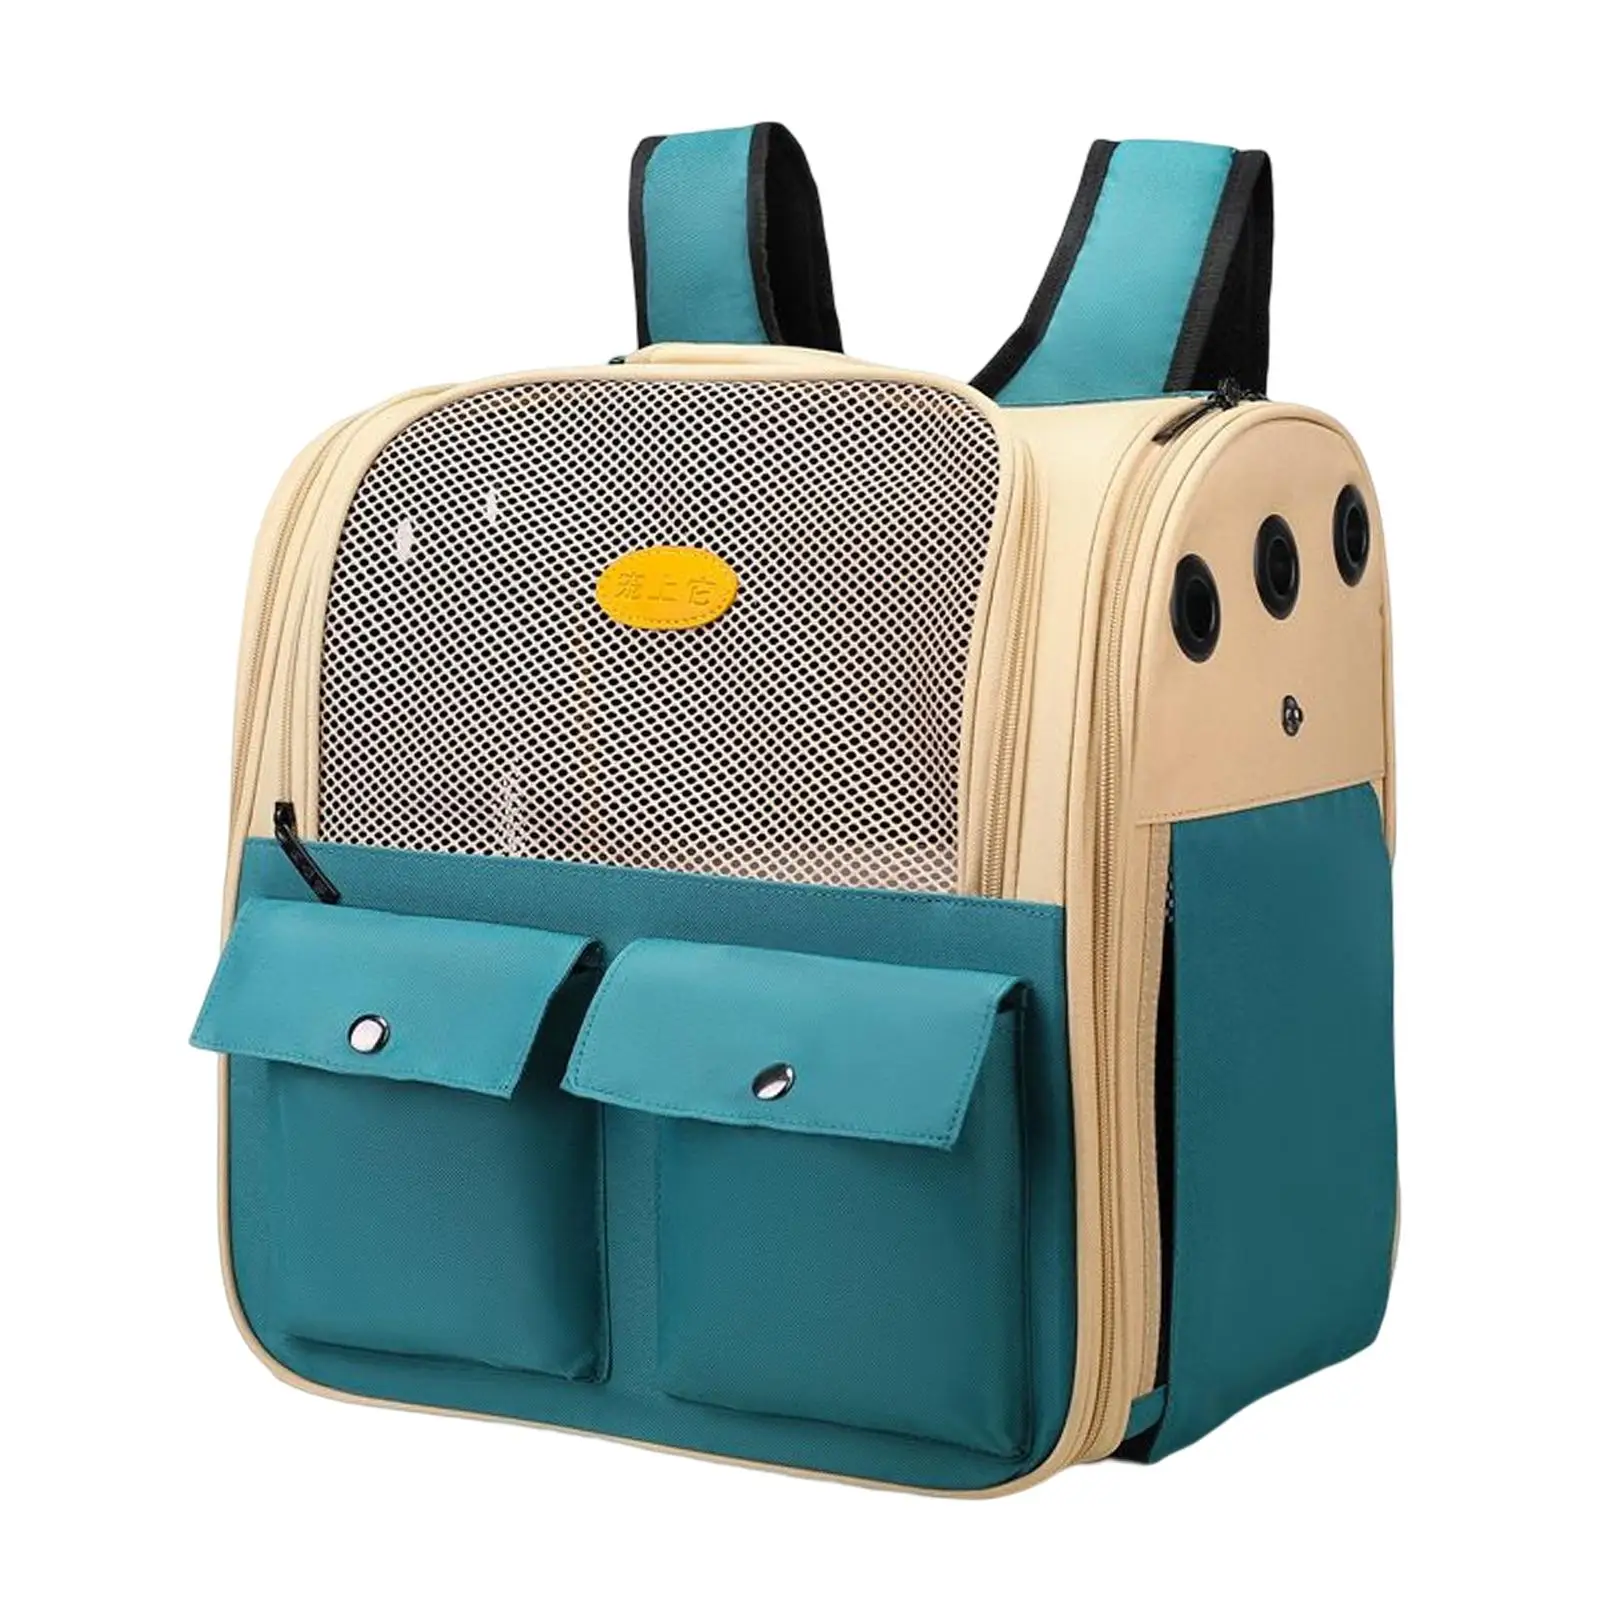 Pet Travel Bag Ventilation Foldable Dog Carriers for Traveling Small Animals